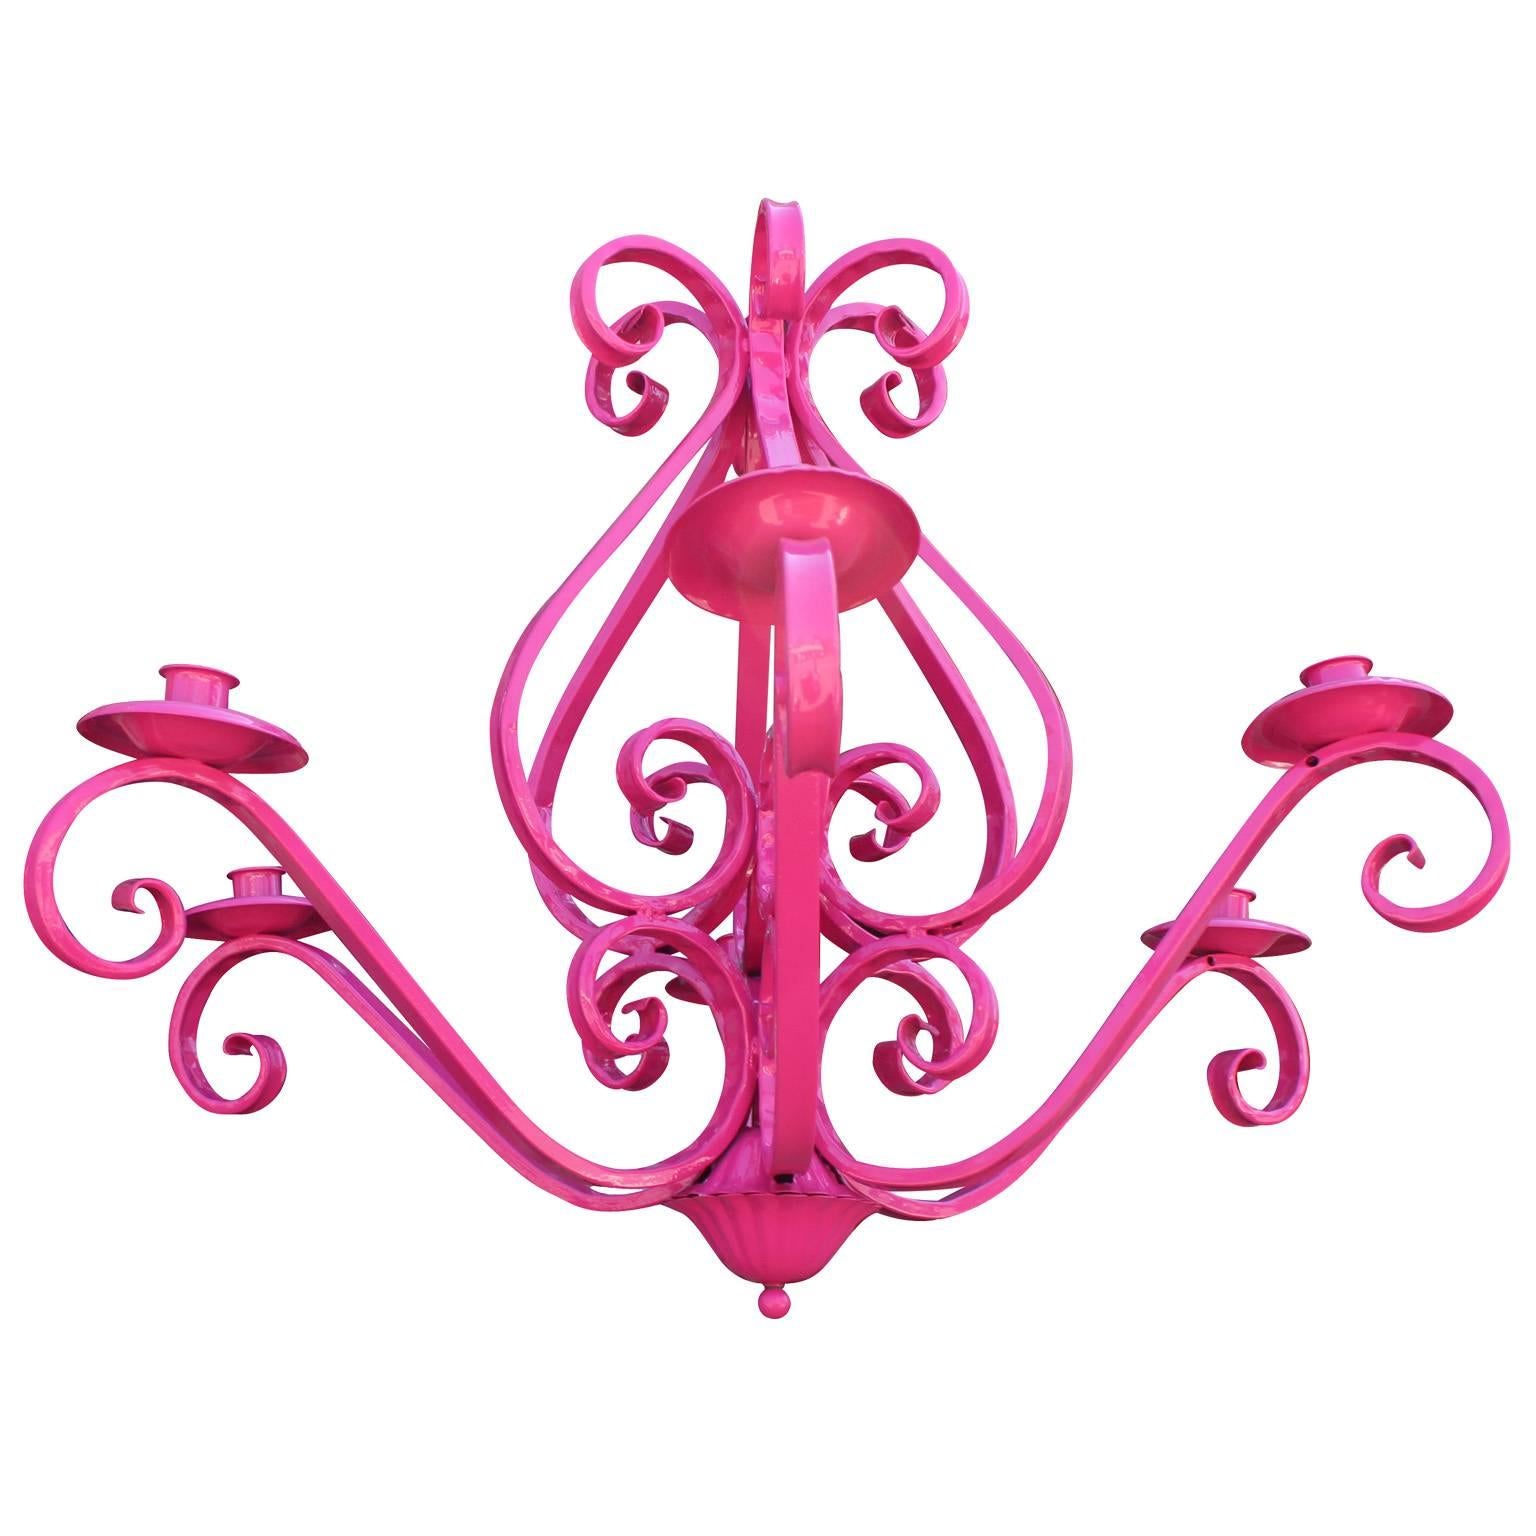 Playful chandelier in a glossy hot pink powder coating. Chandelier adds the perfect pop of color to any space.